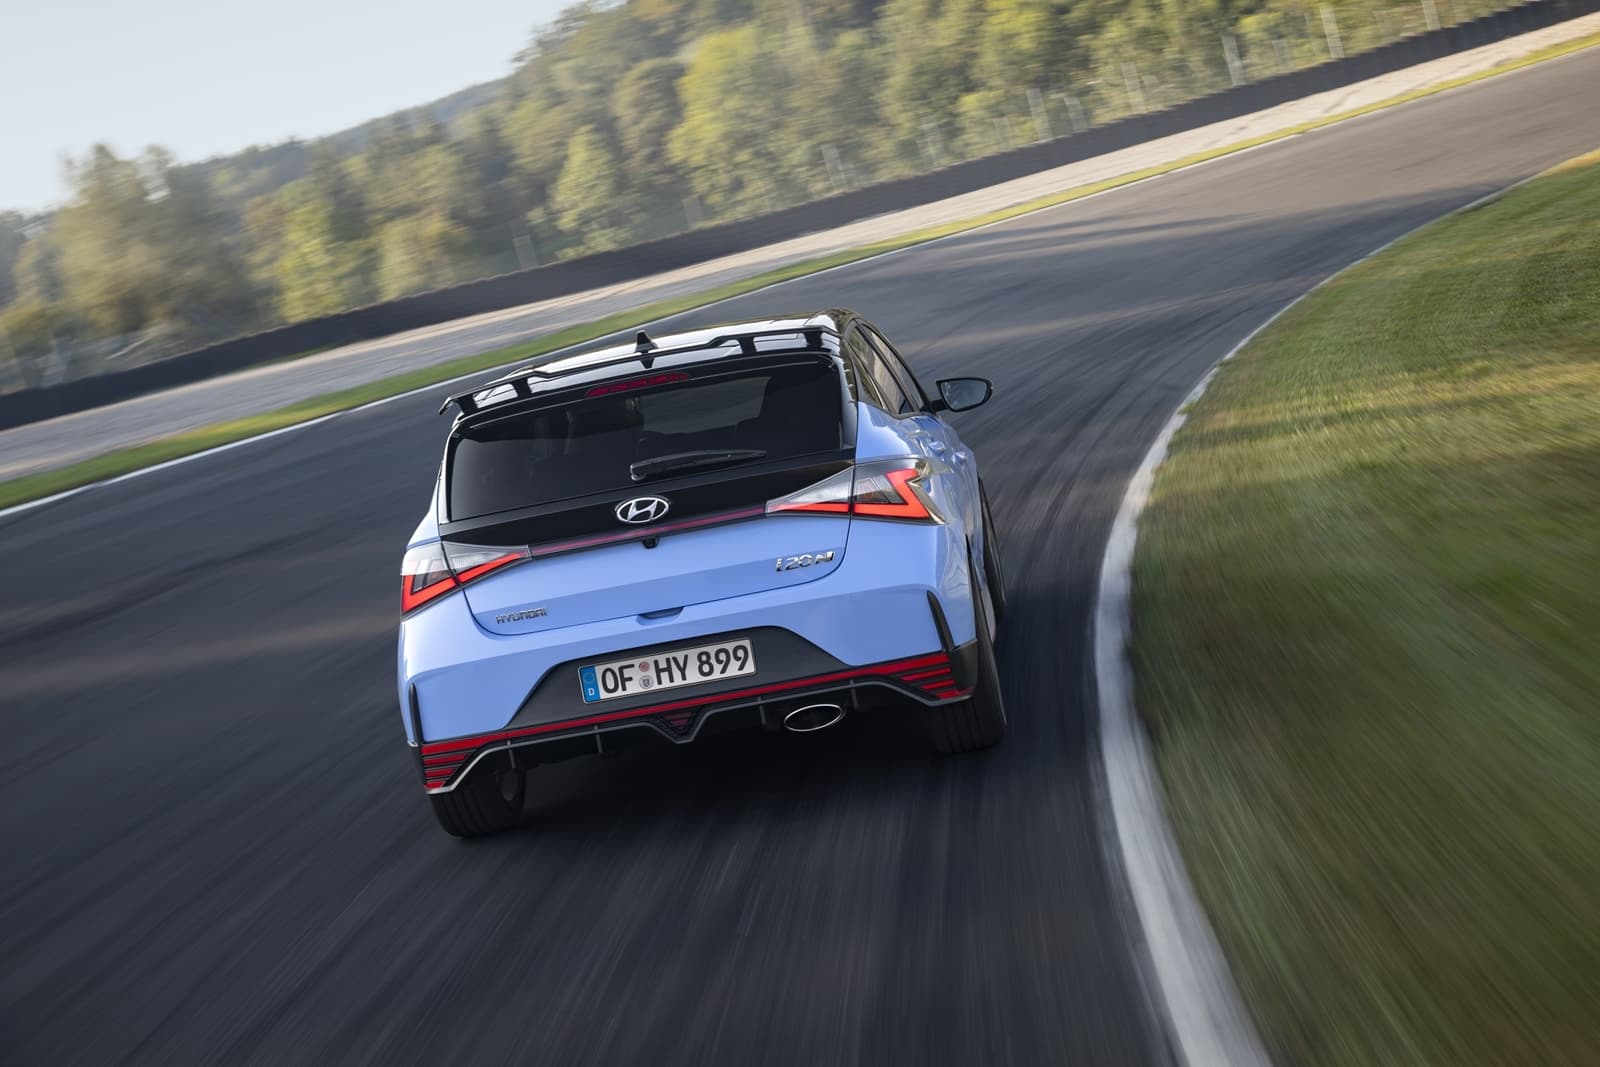 Hyundai continues to believe in urban sports: a new Hyundai i20 N will arrive, although it will be decaffeinated